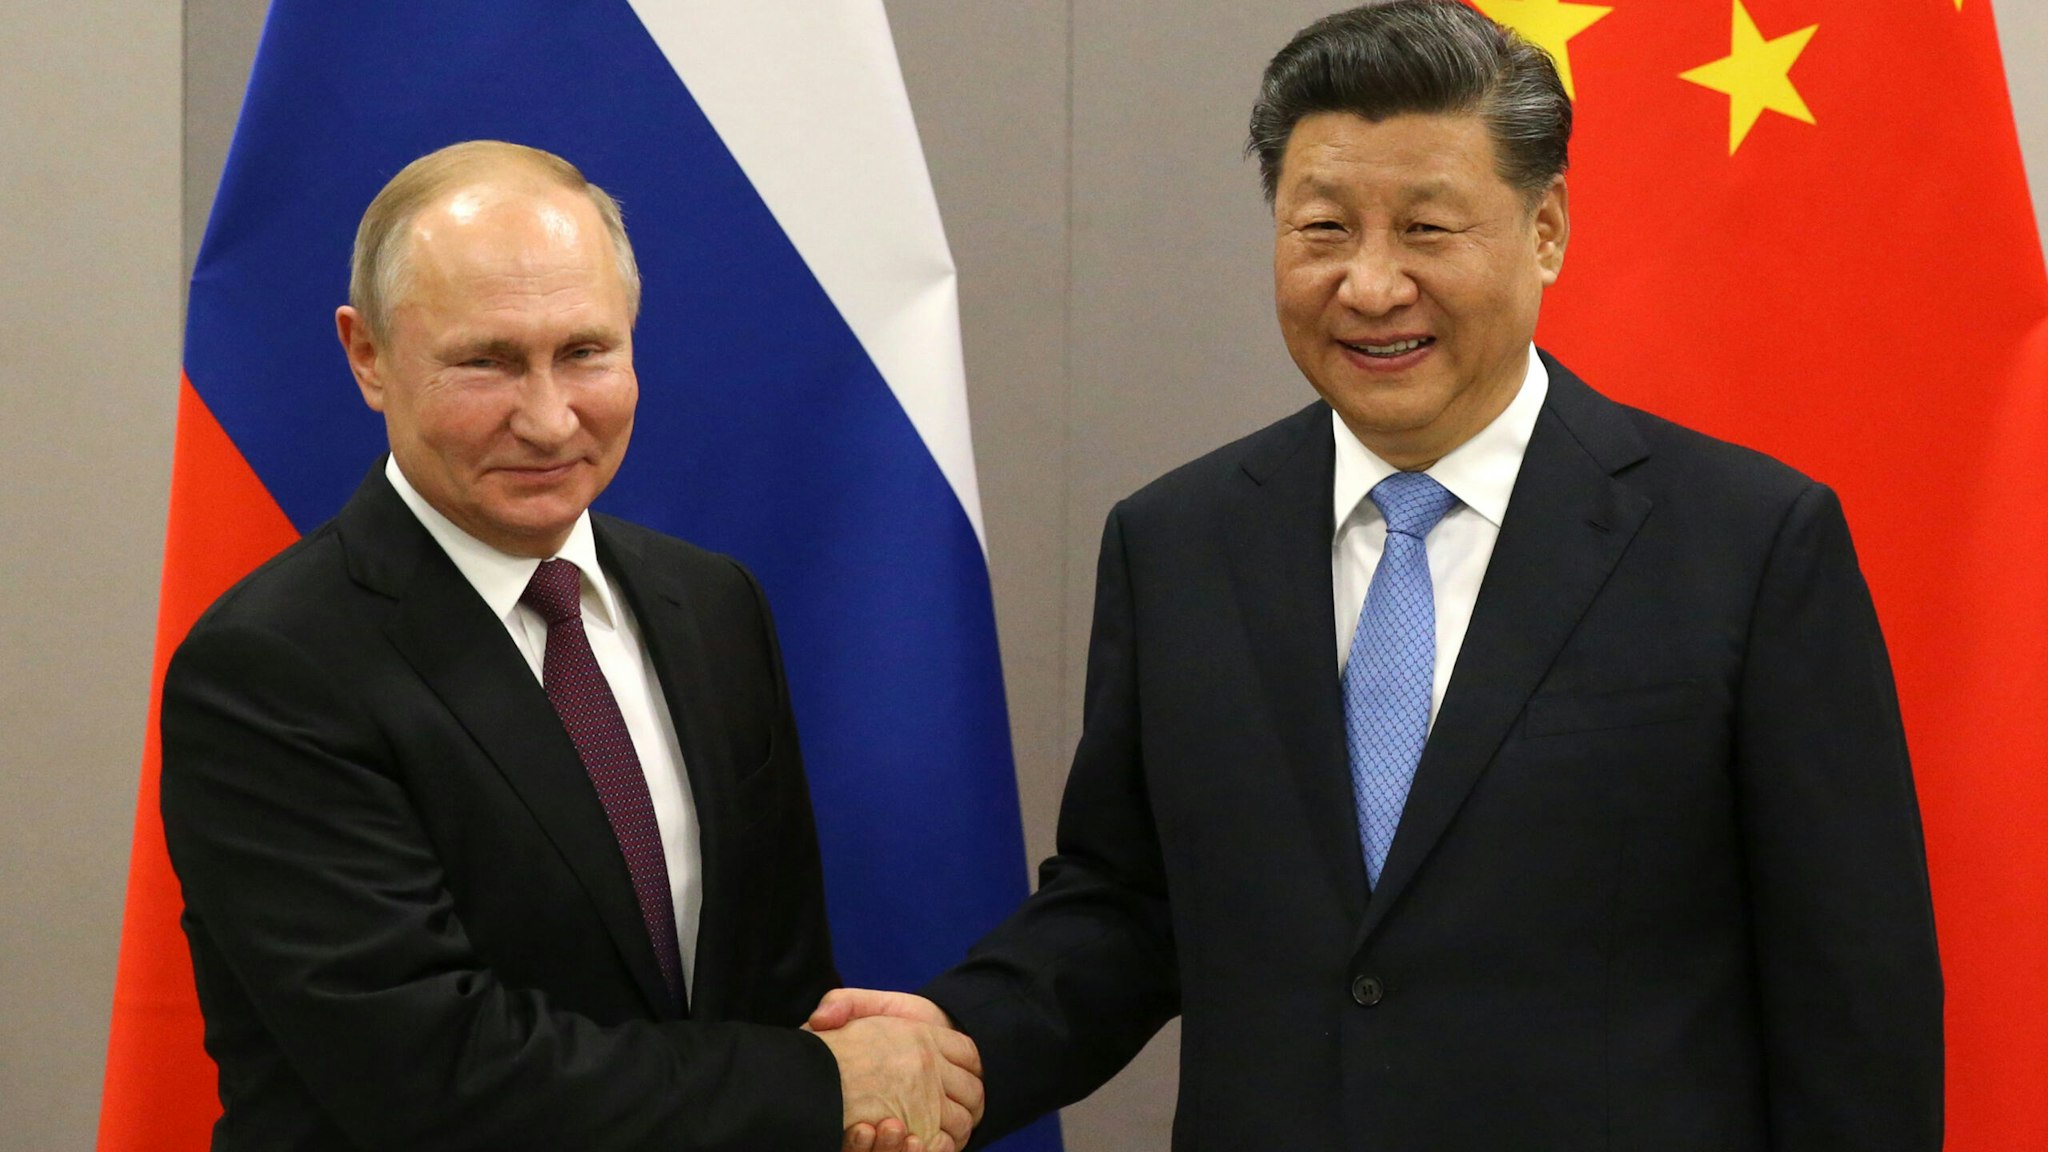 BRASILIA, BRAZIL - NOVEMBER 13: (RUSSIA OUT) Russian President Vladimir Putin (L) greets Chinese President Xi Jinping (R) during their bilateral meeting on November 13, 2019 in Brasilia, Brazil. The leaders of Russia, China, Brazil, India and South Africa have gathered in Brasilia for the BRICS leaders summit.